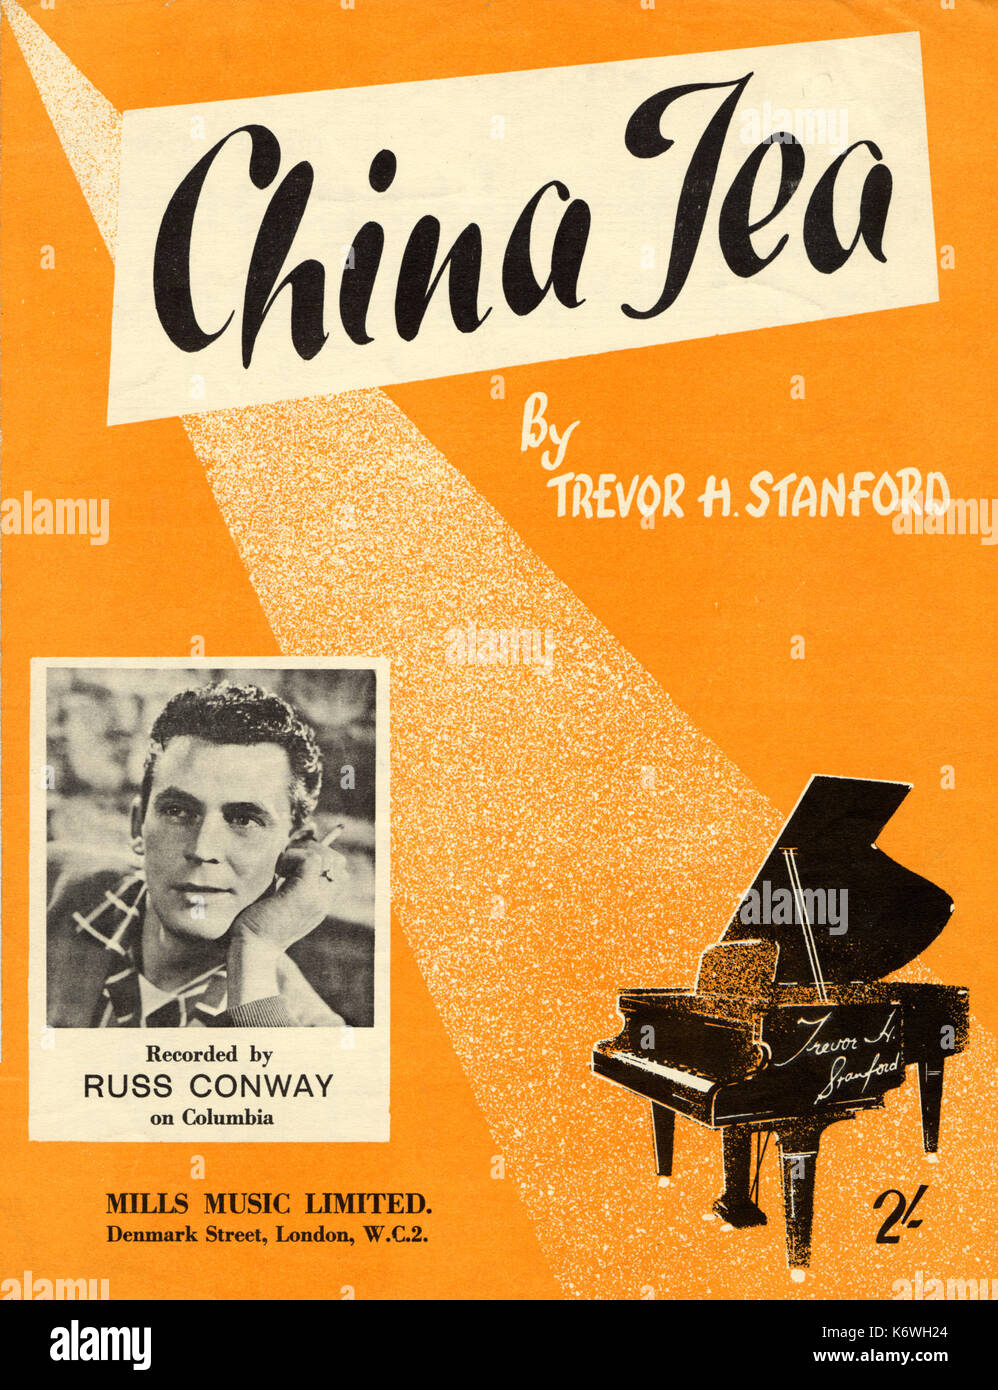 Russ Conway,   Photograph on score cover, 1959 Score Cover of 'China Tea' by Trevor H Stanford.  Published by Mills Music Ltd, London, 1959Grand Piano Stock Photo